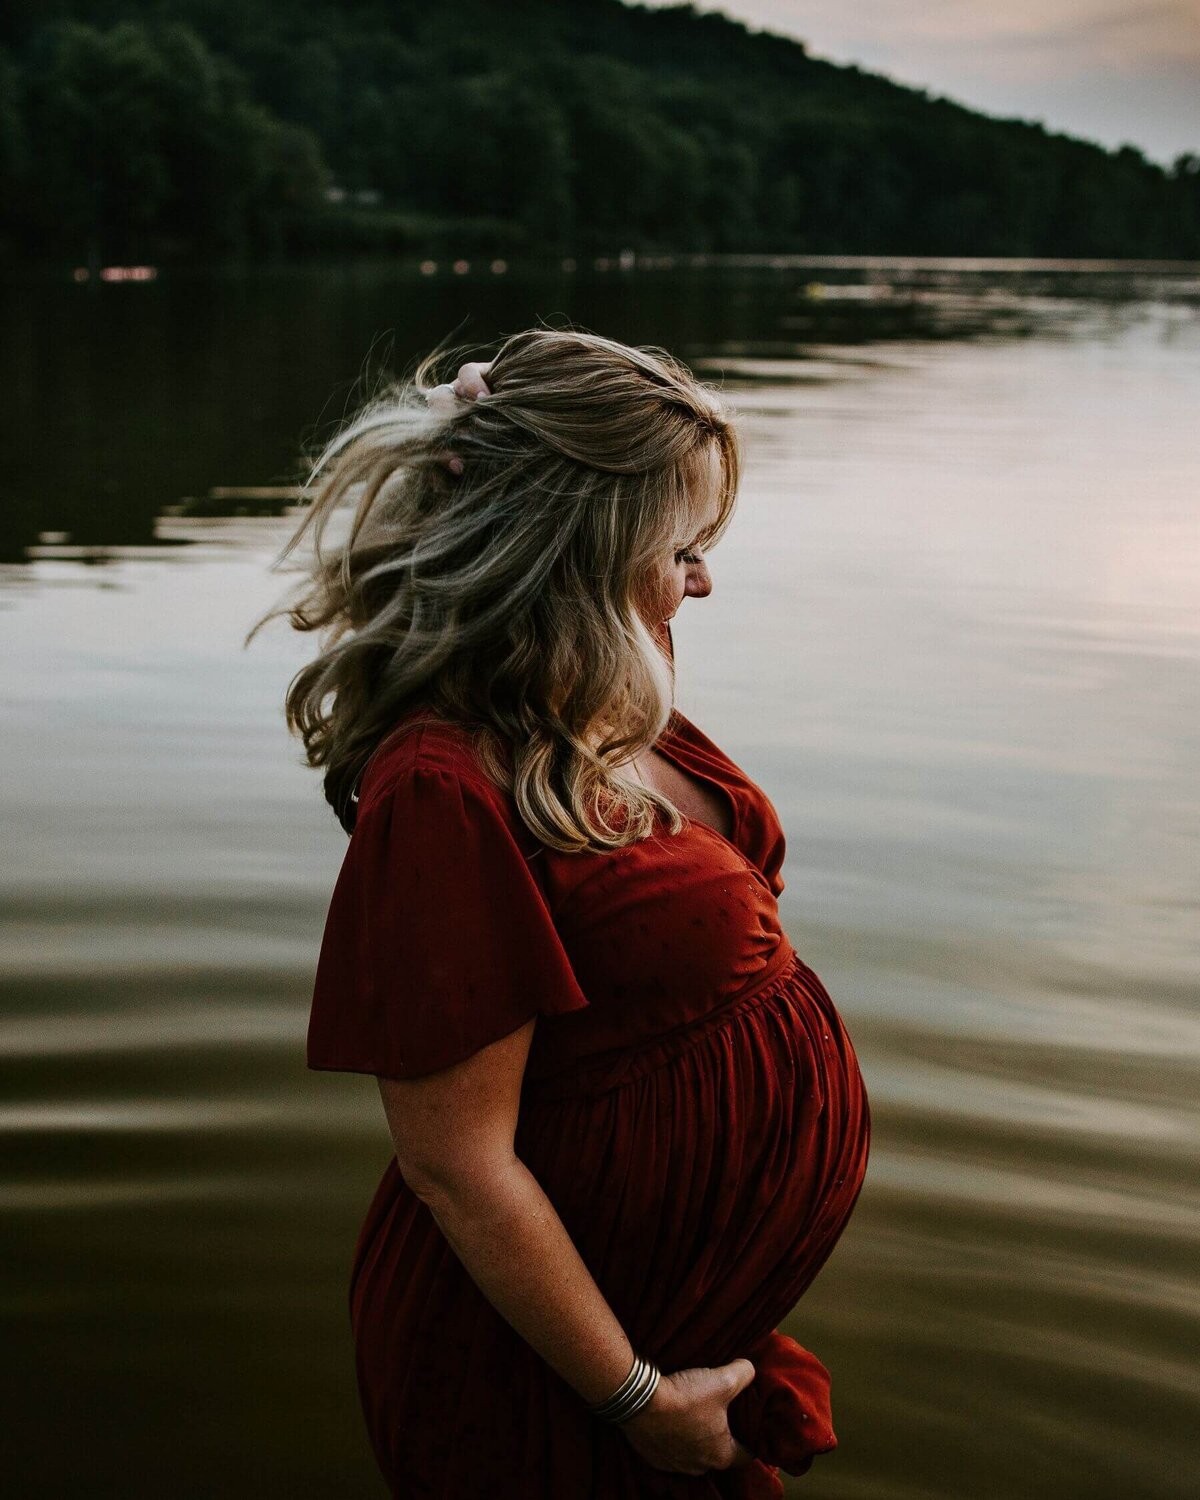 A pregnant woman in a red dress poses elegantly by a lake, captured by a Pittsburgh maternity photographer.